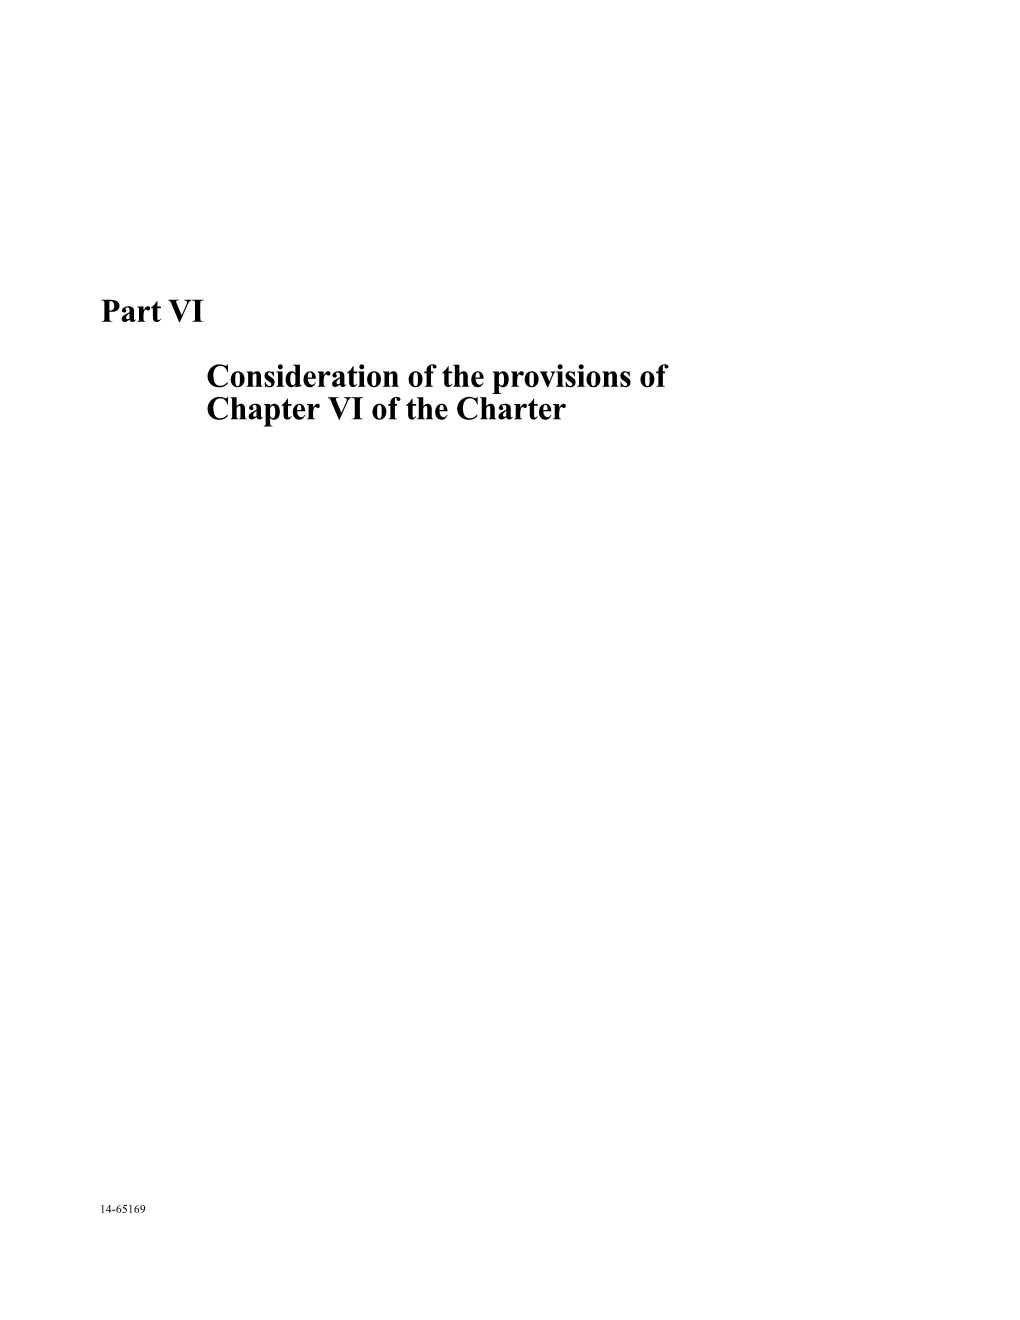 Part VI Consideration of the Provisions of Chapter VI of the Charter